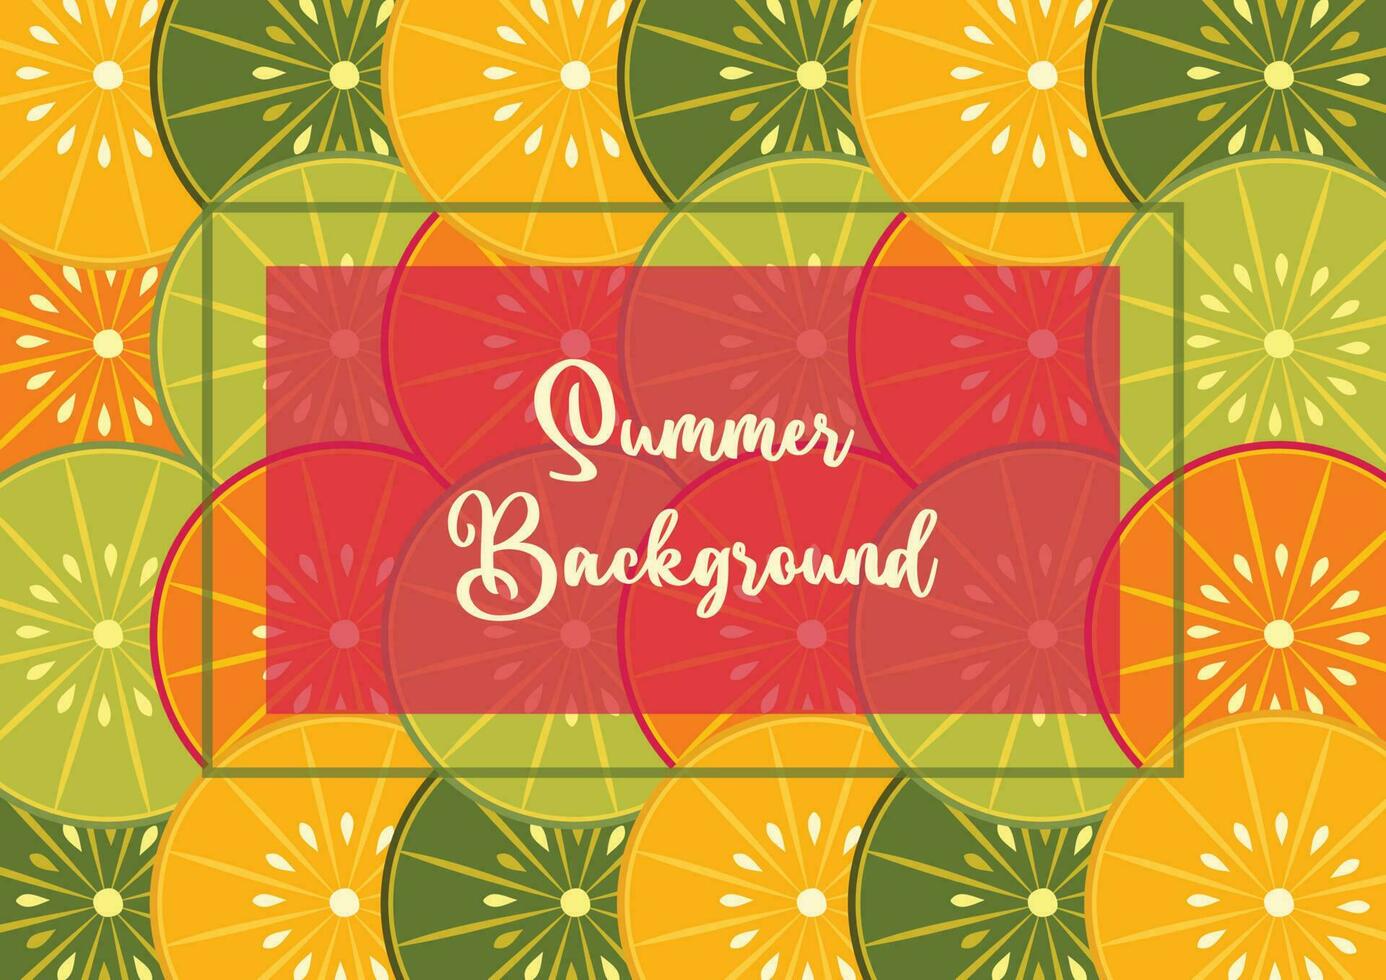 summer background, citrus fruit pattern in refreshing colors. vector illustration for banners, greeting cards, flyers, social media, web.